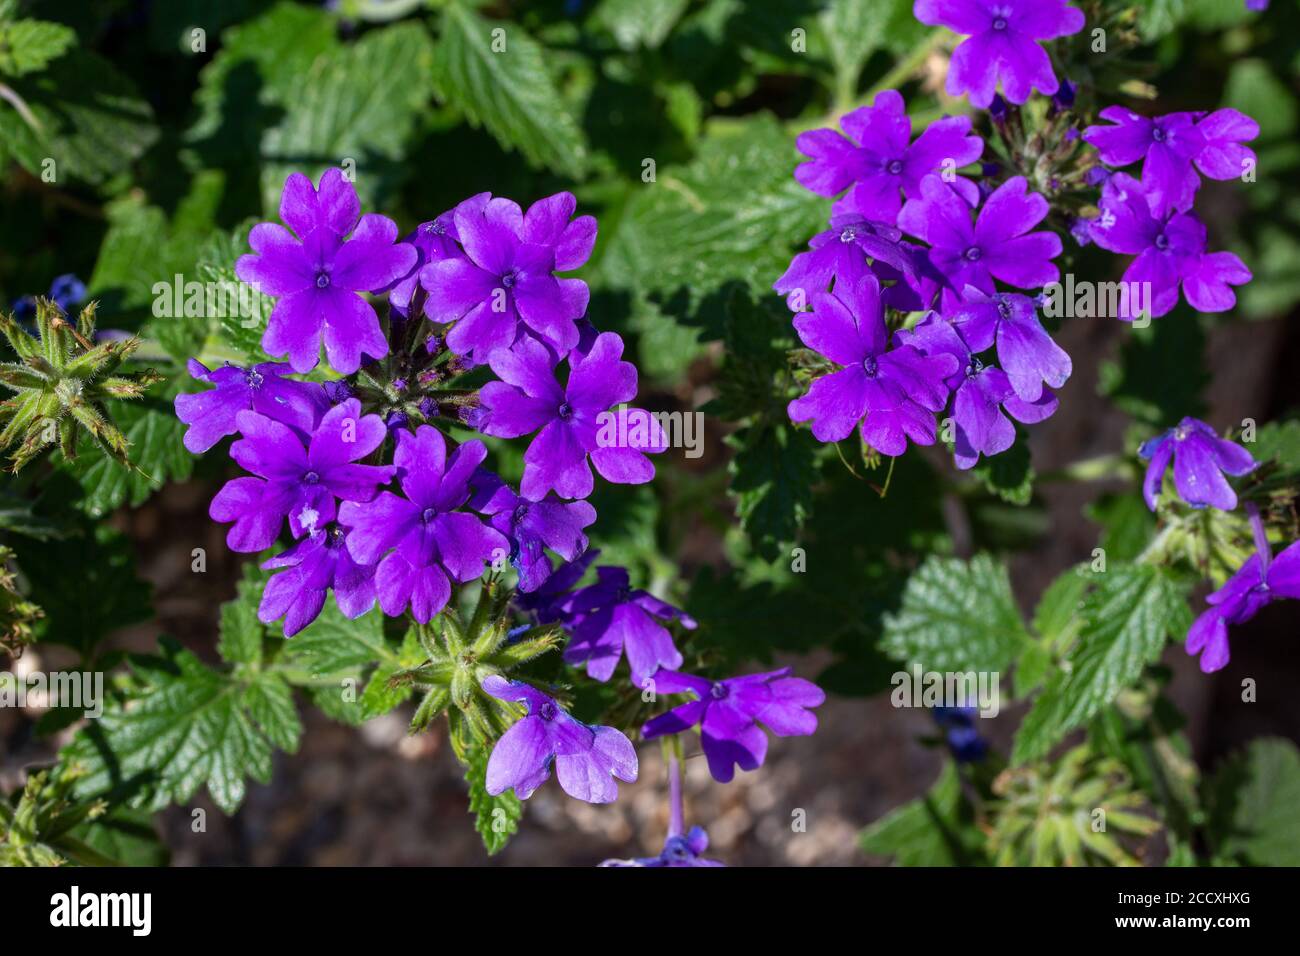 Close up view of bright purple blooming rose mock vervain flowers (glandularia canadensis) in a sunny ornamental garden Stock Photo